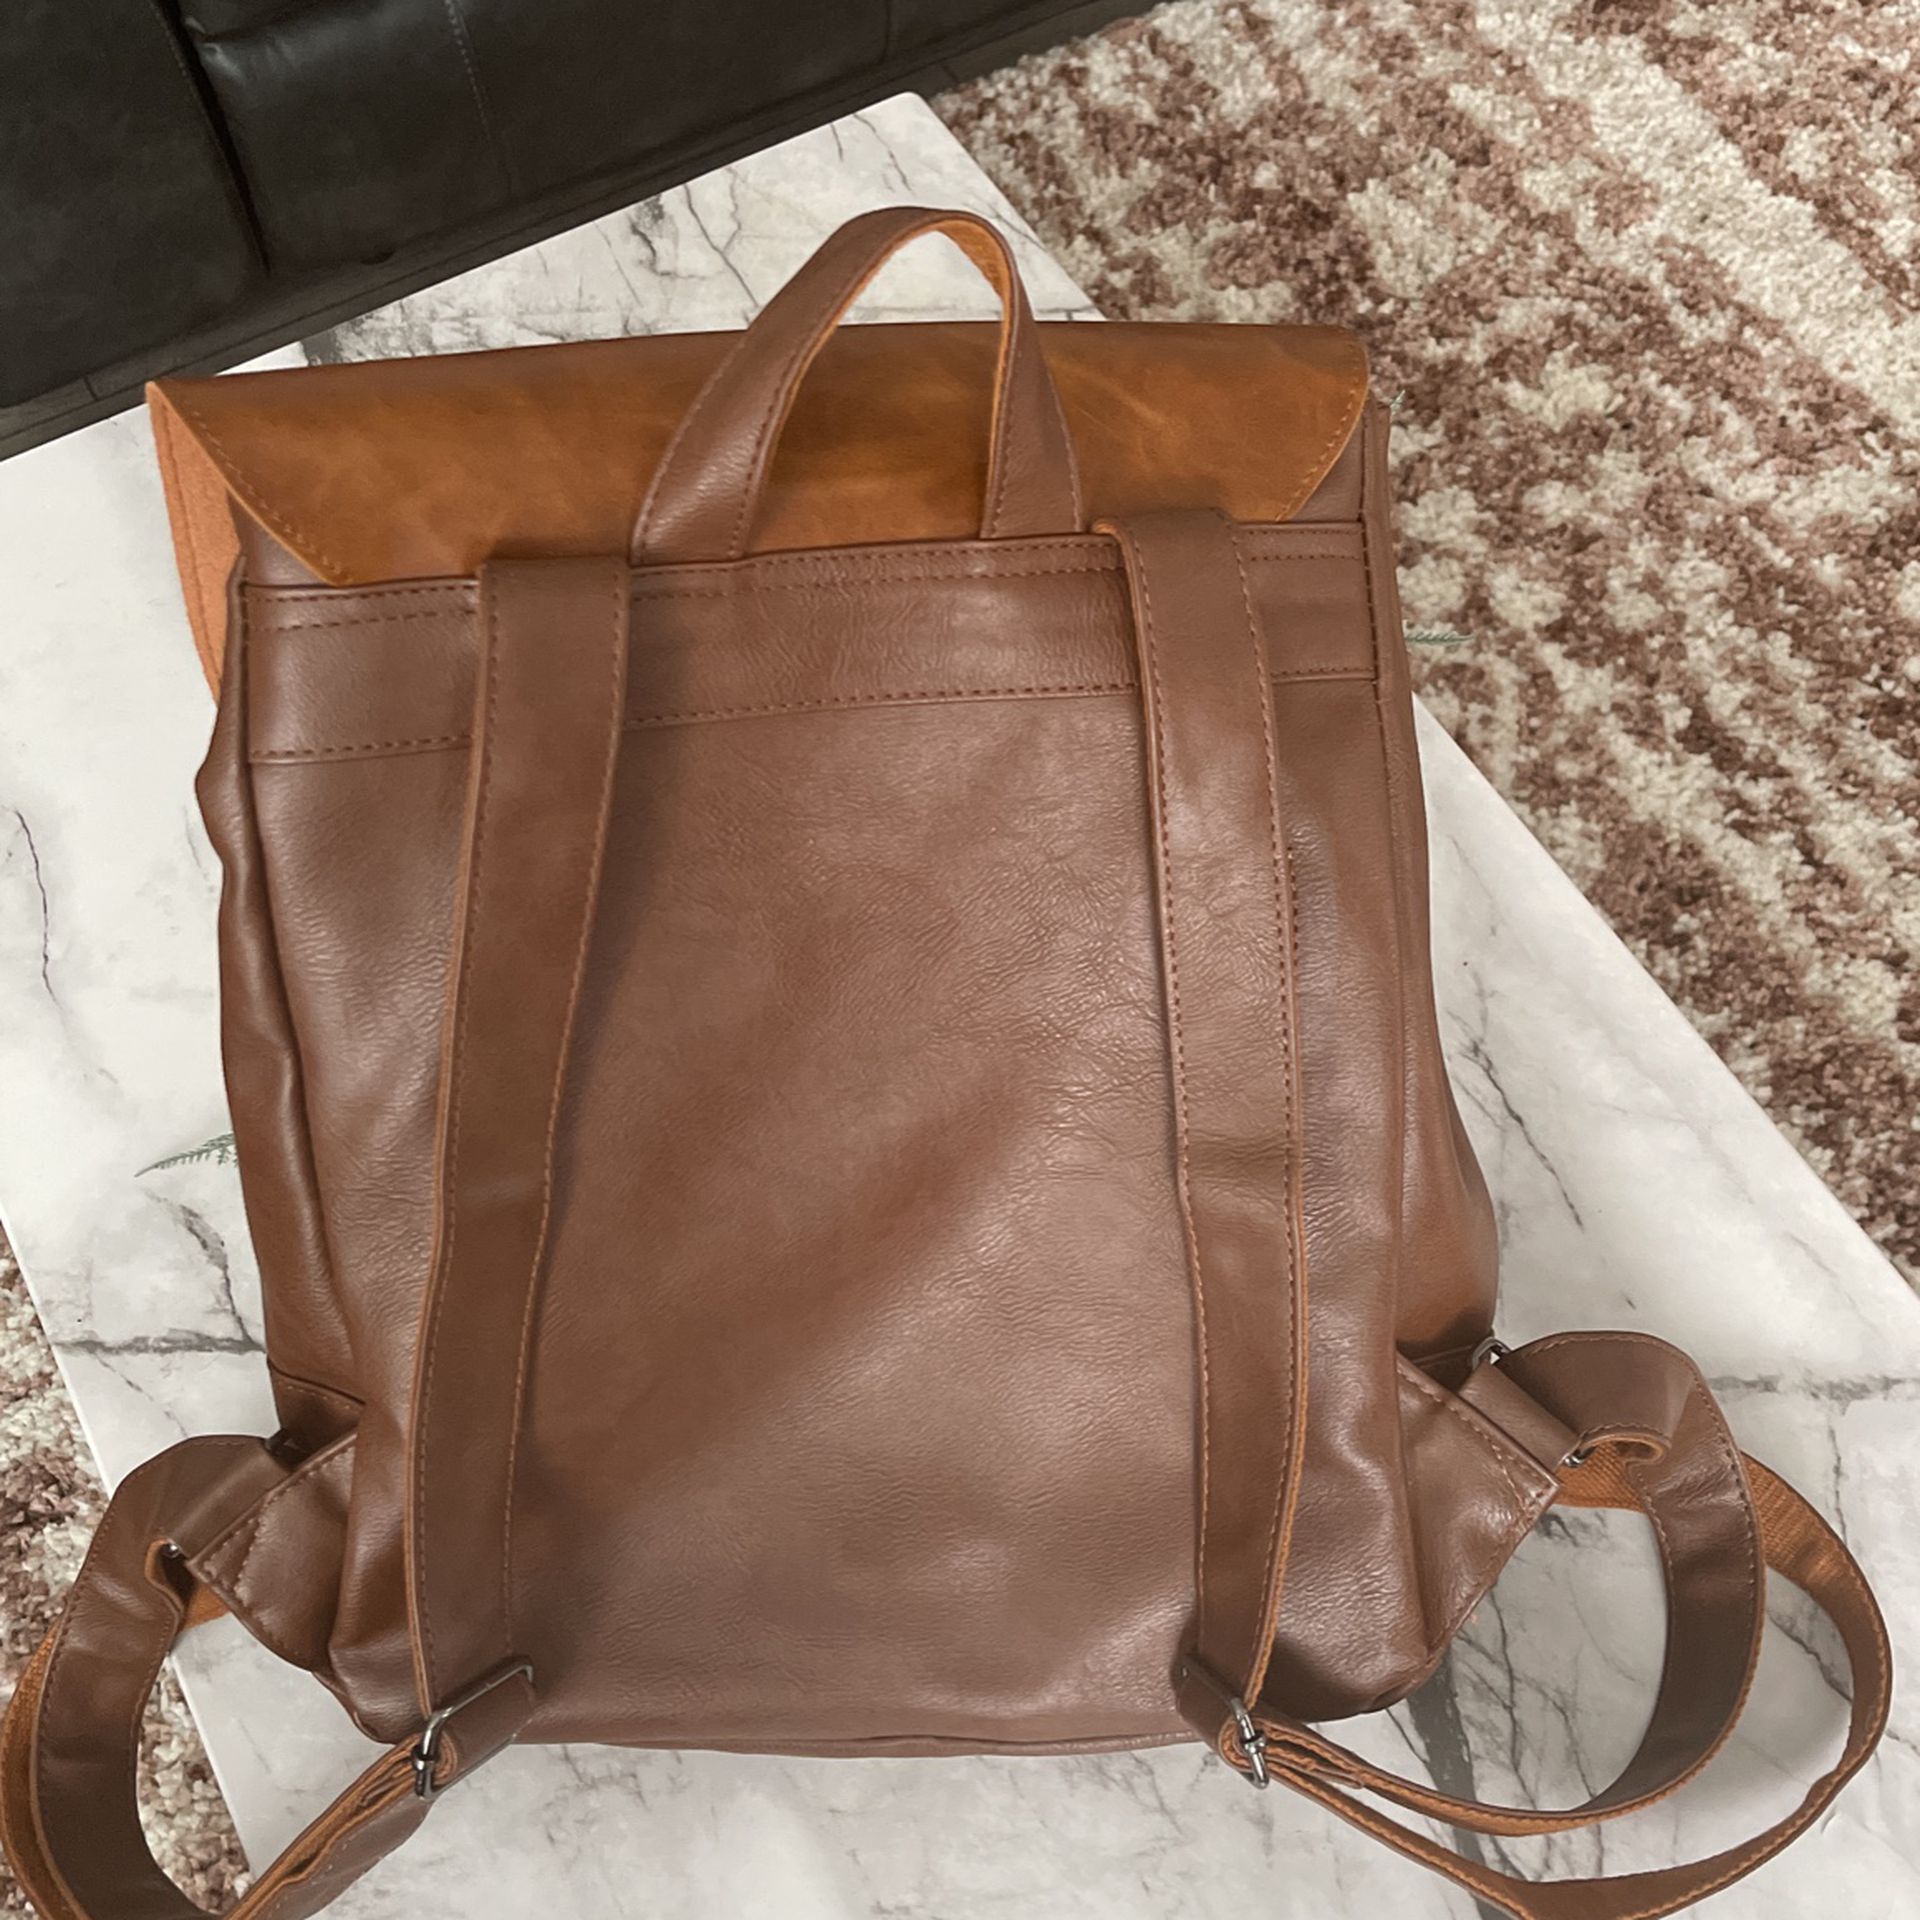 Fawn Design Fanny Pack!! for Sale in Bothell, WA - OfferUp